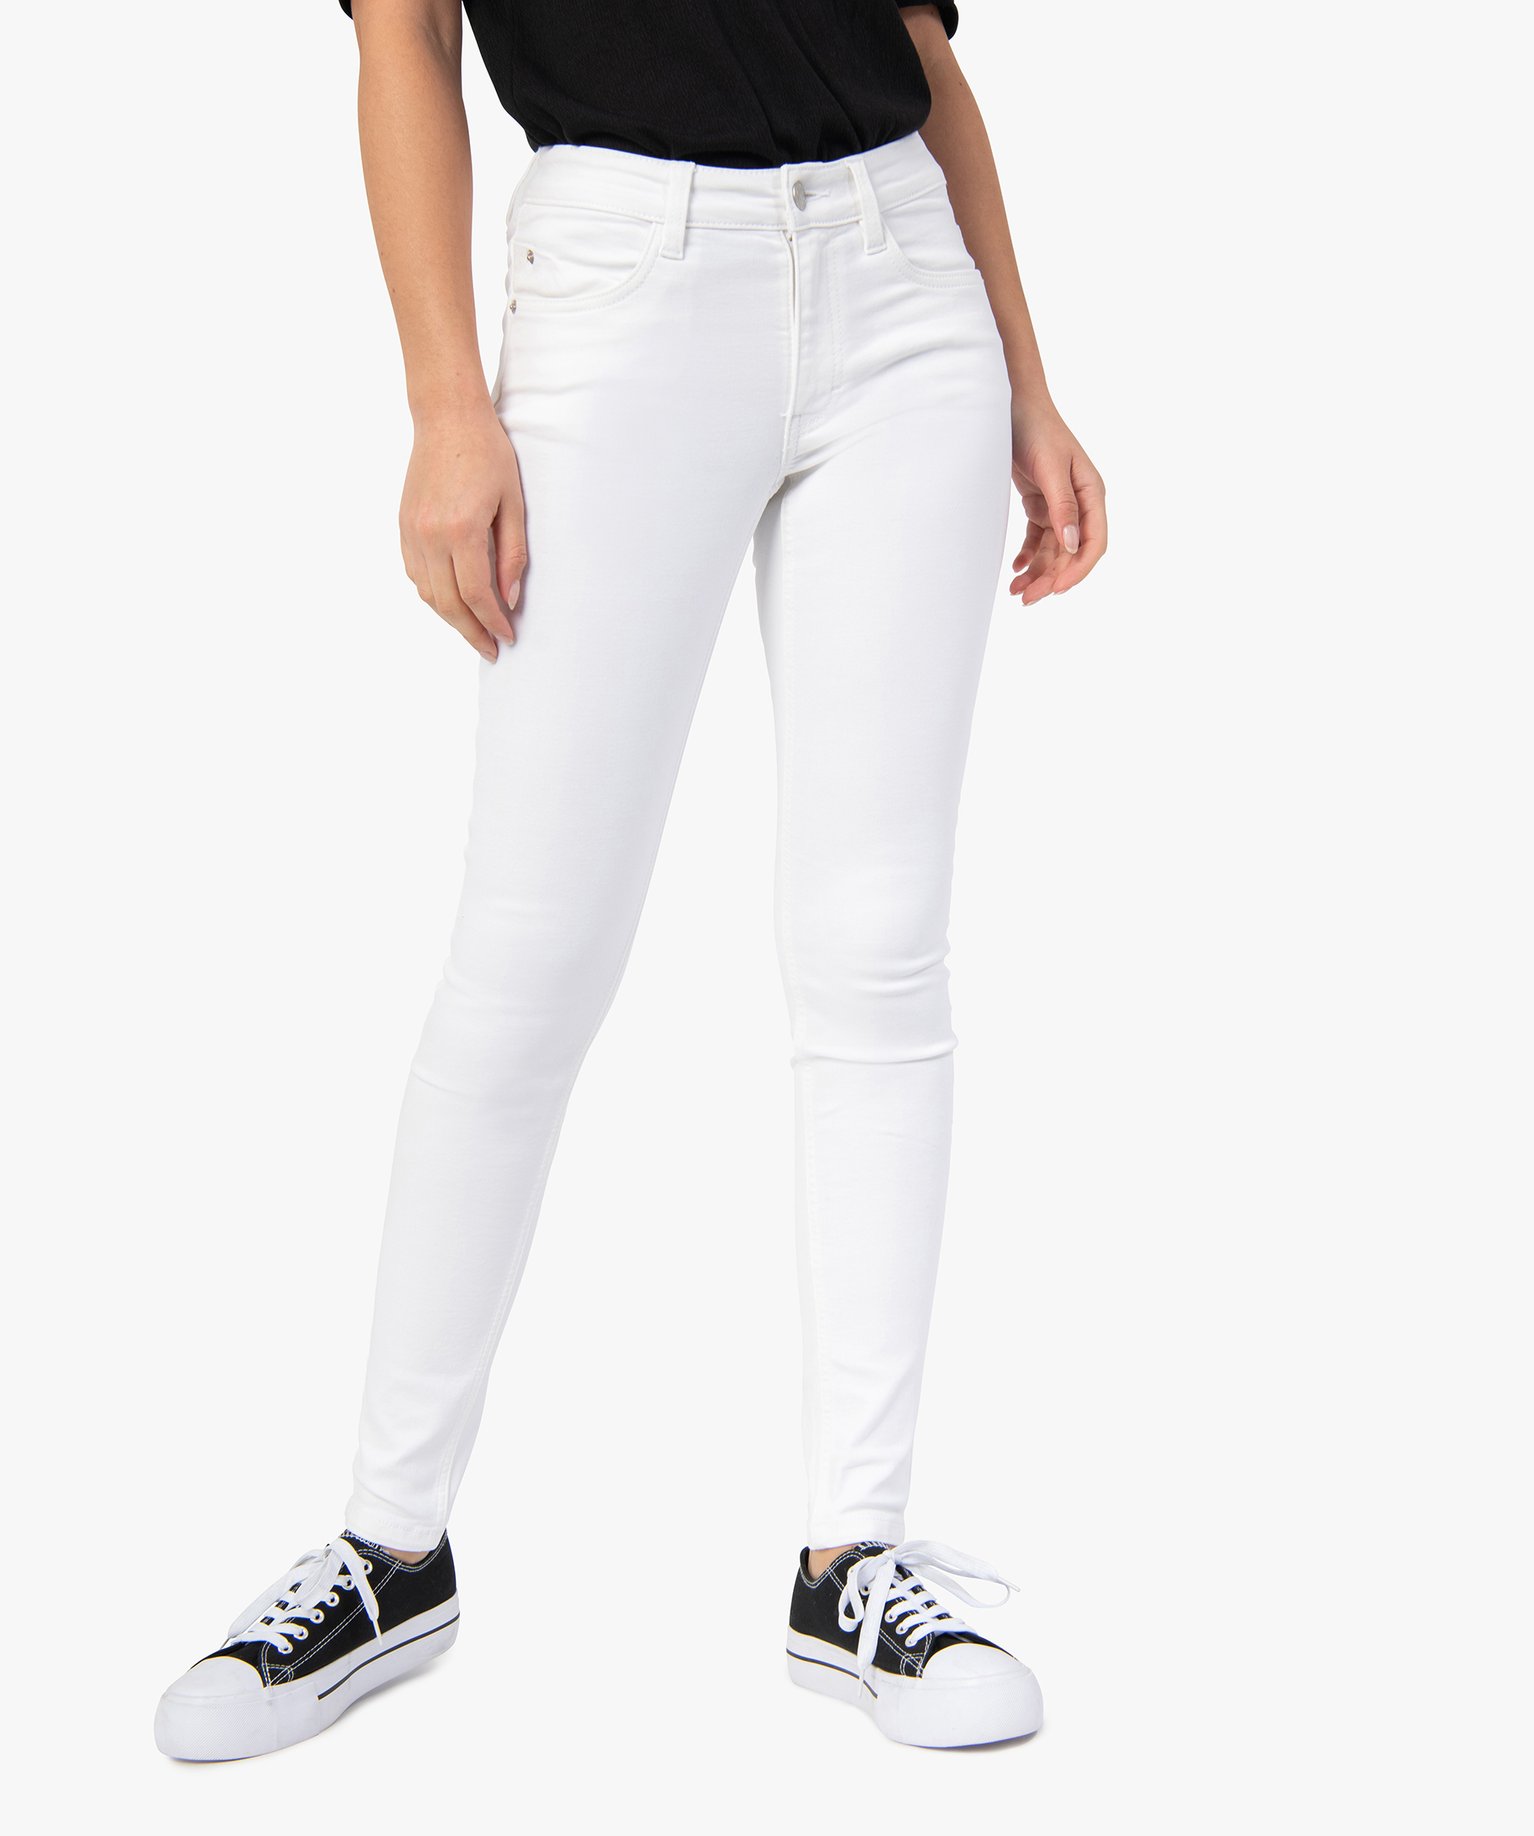 jean femme coupe skinny taille normale blanc pantalons